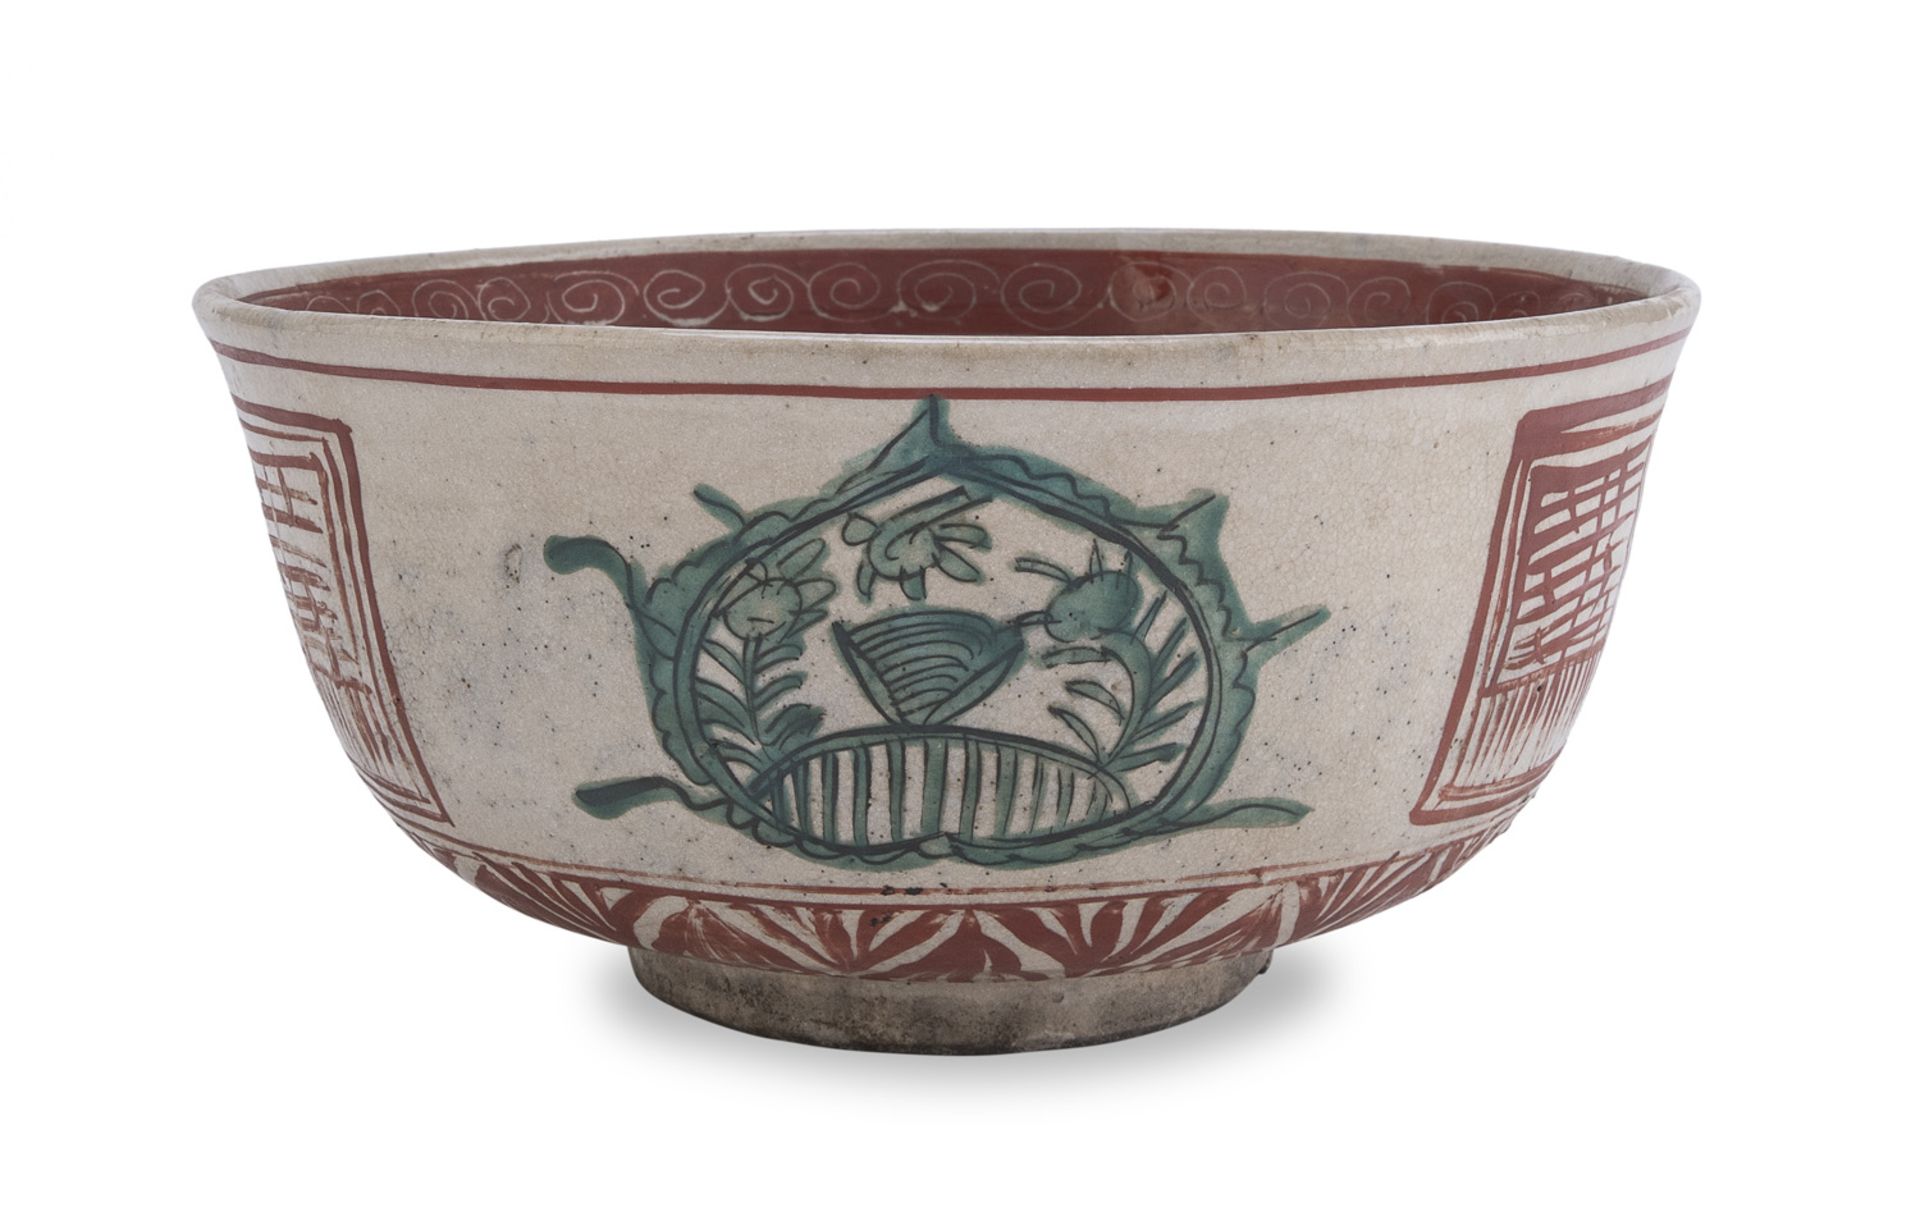 A CHINESE POLYCHROME ENAMELED PORCELAIN BOWL 17TH CENTURY. - Image 2 of 2